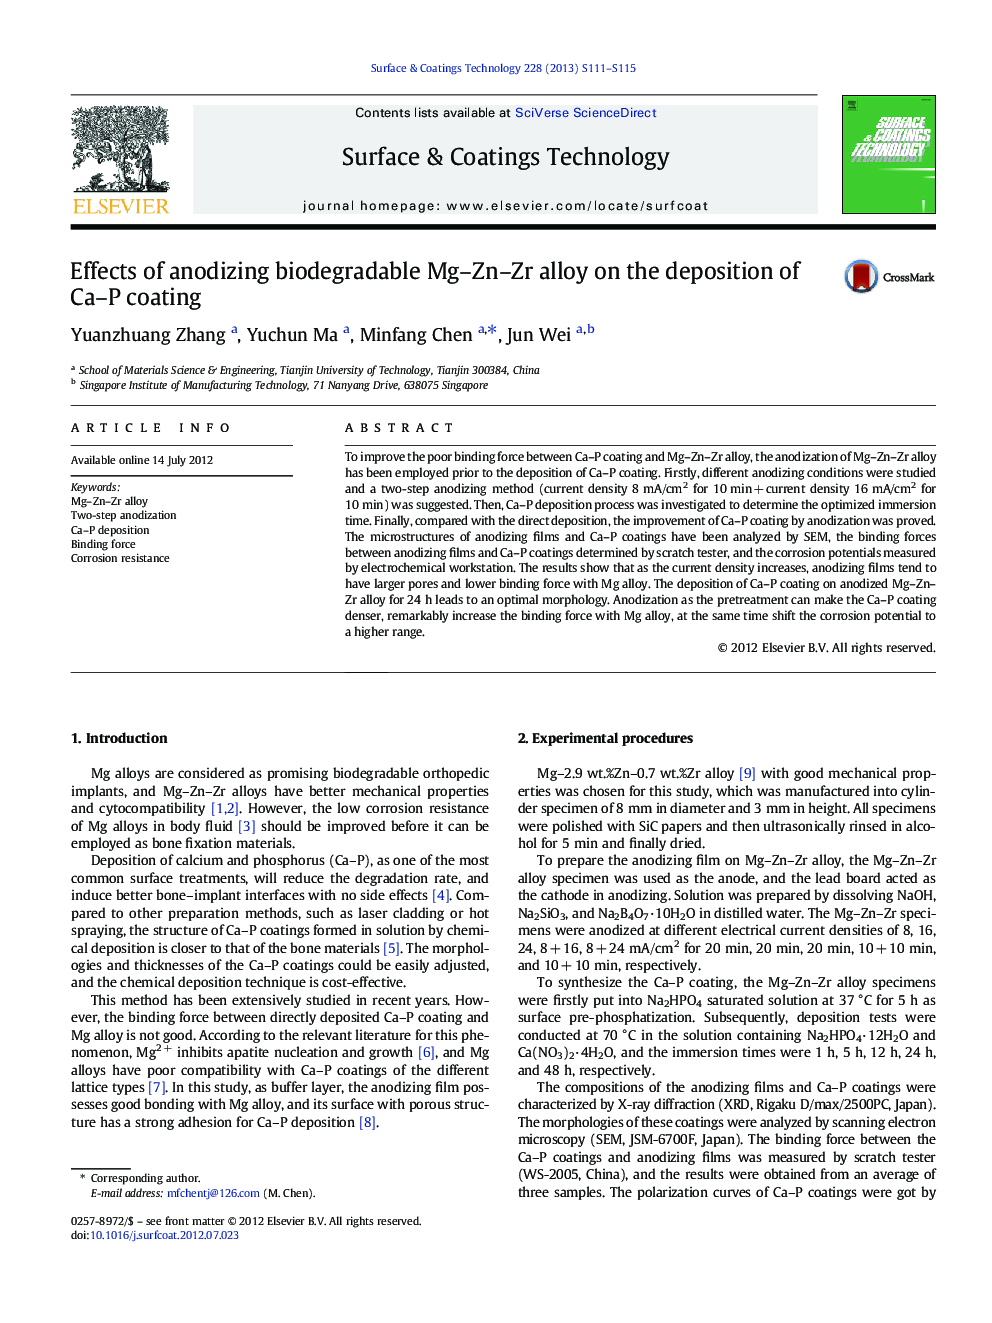 Effects of anodizing biodegradable Mg-Zn-Zr alloy on the deposition of Ca-P coating